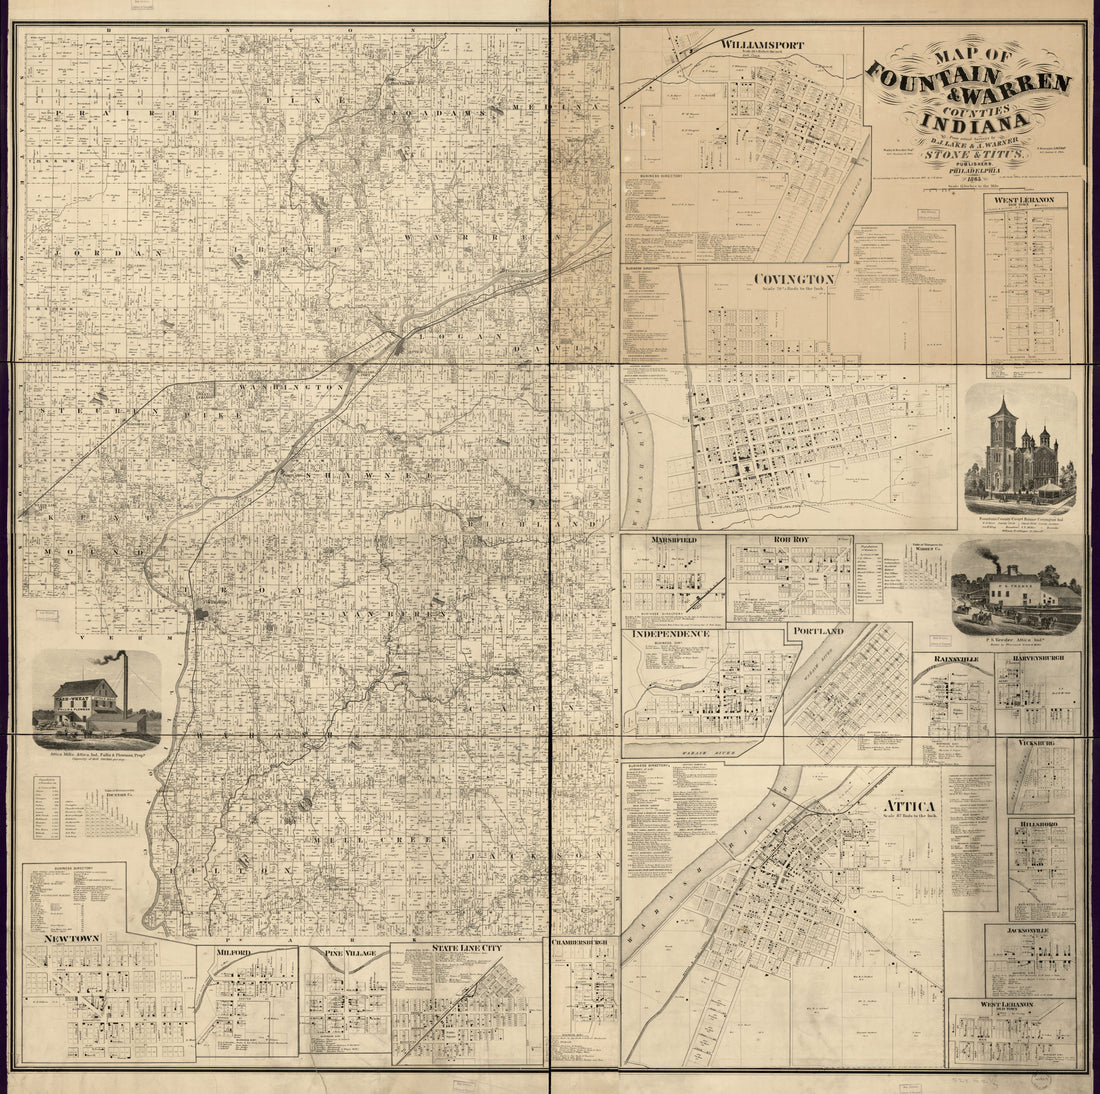 This old map of Map of Fountain &amp; Warren Counties, Indiana (Map of Fountain and Warren Counties, Indiana) from 1865 was created by D. J. Lake, A. Warner,  Worley &amp; Bracher in 1865